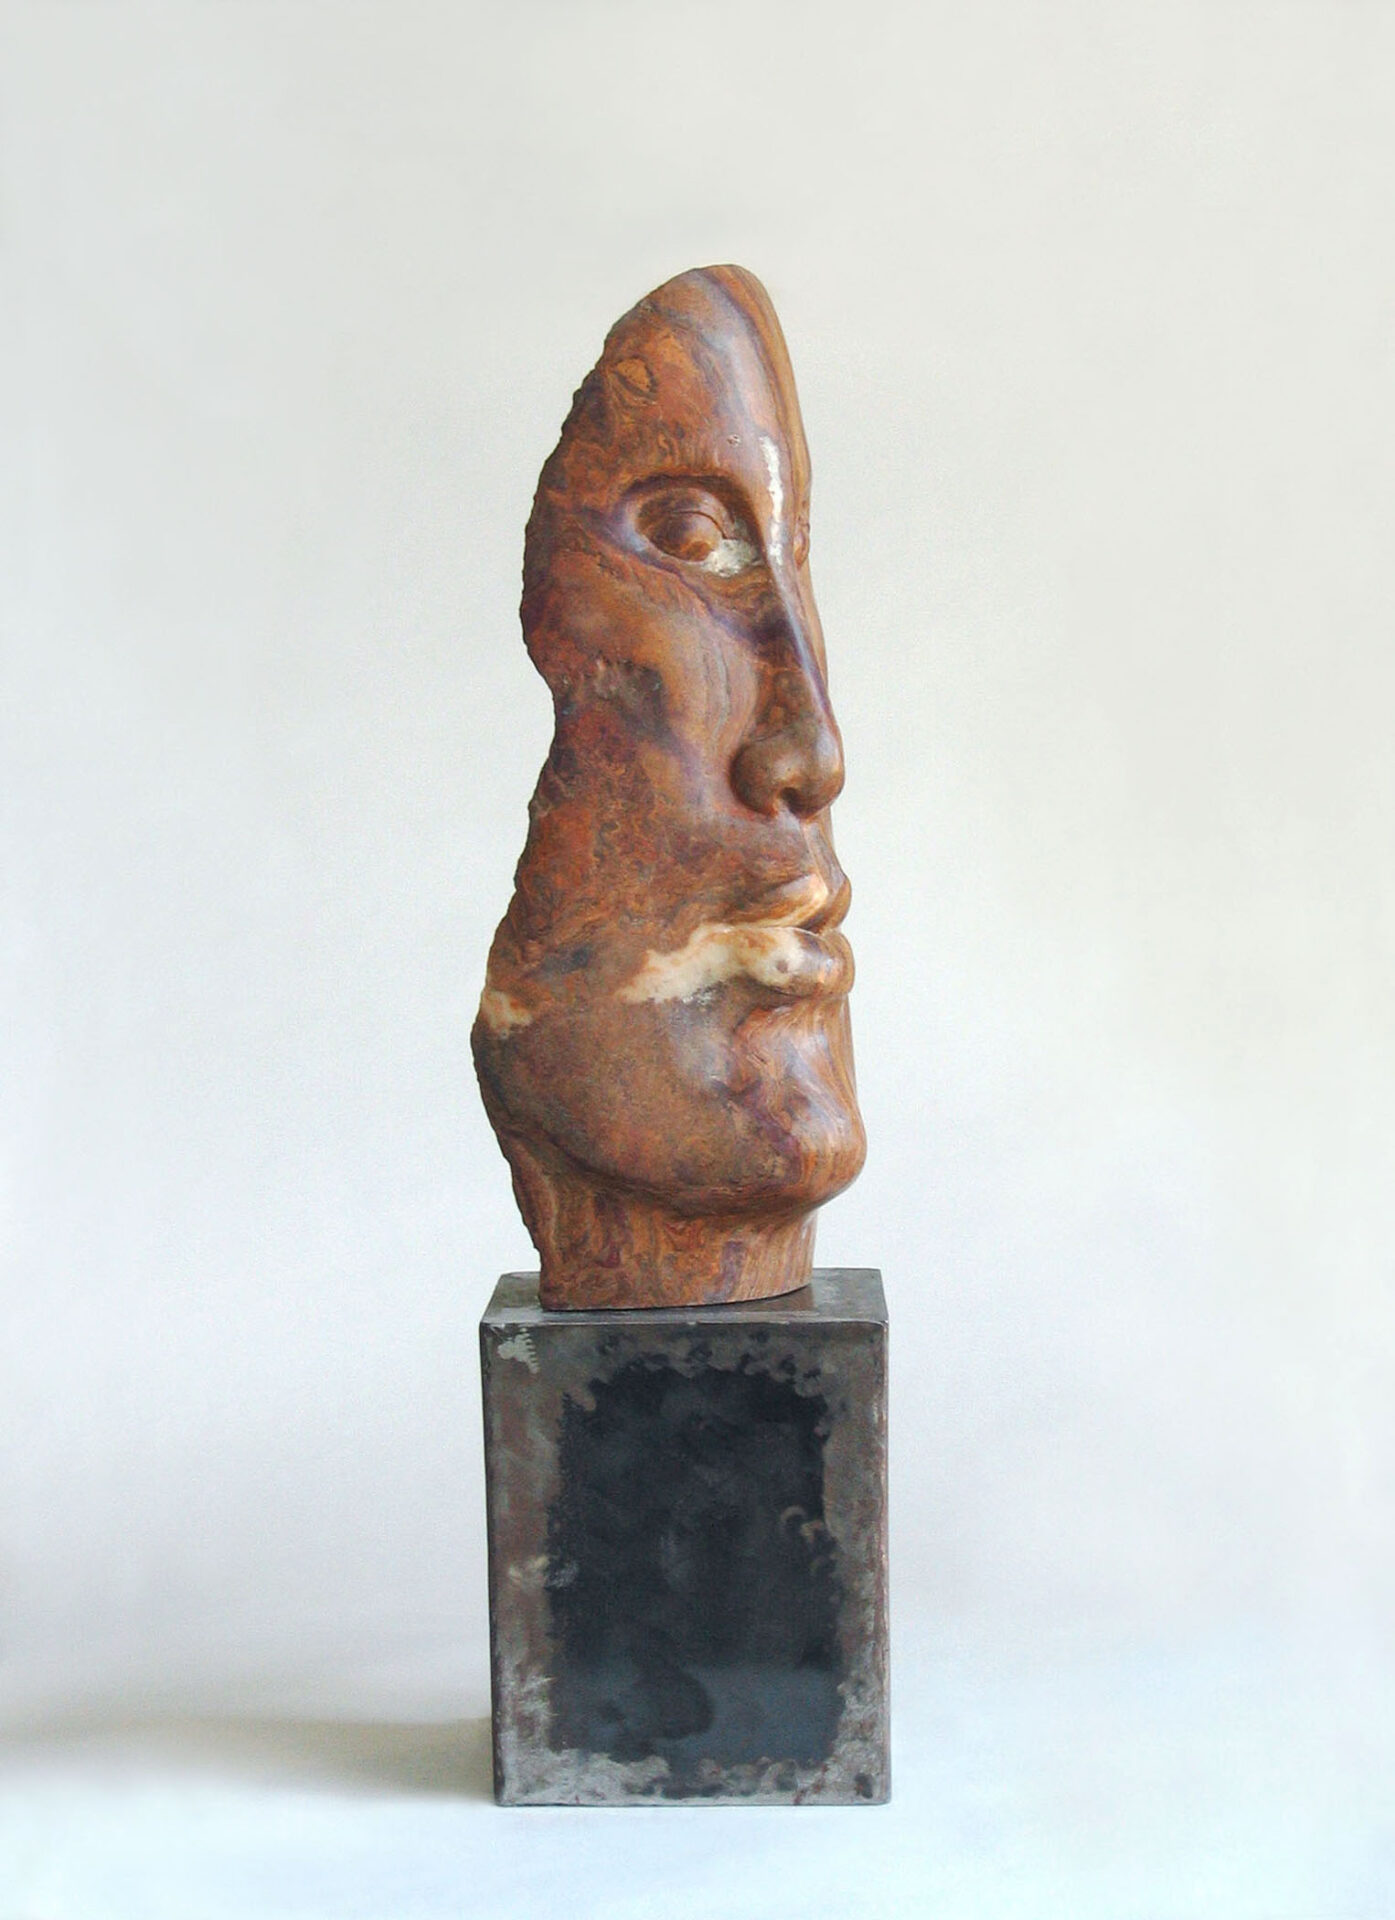 Mask<br>29"x 10.5"x 10.5"